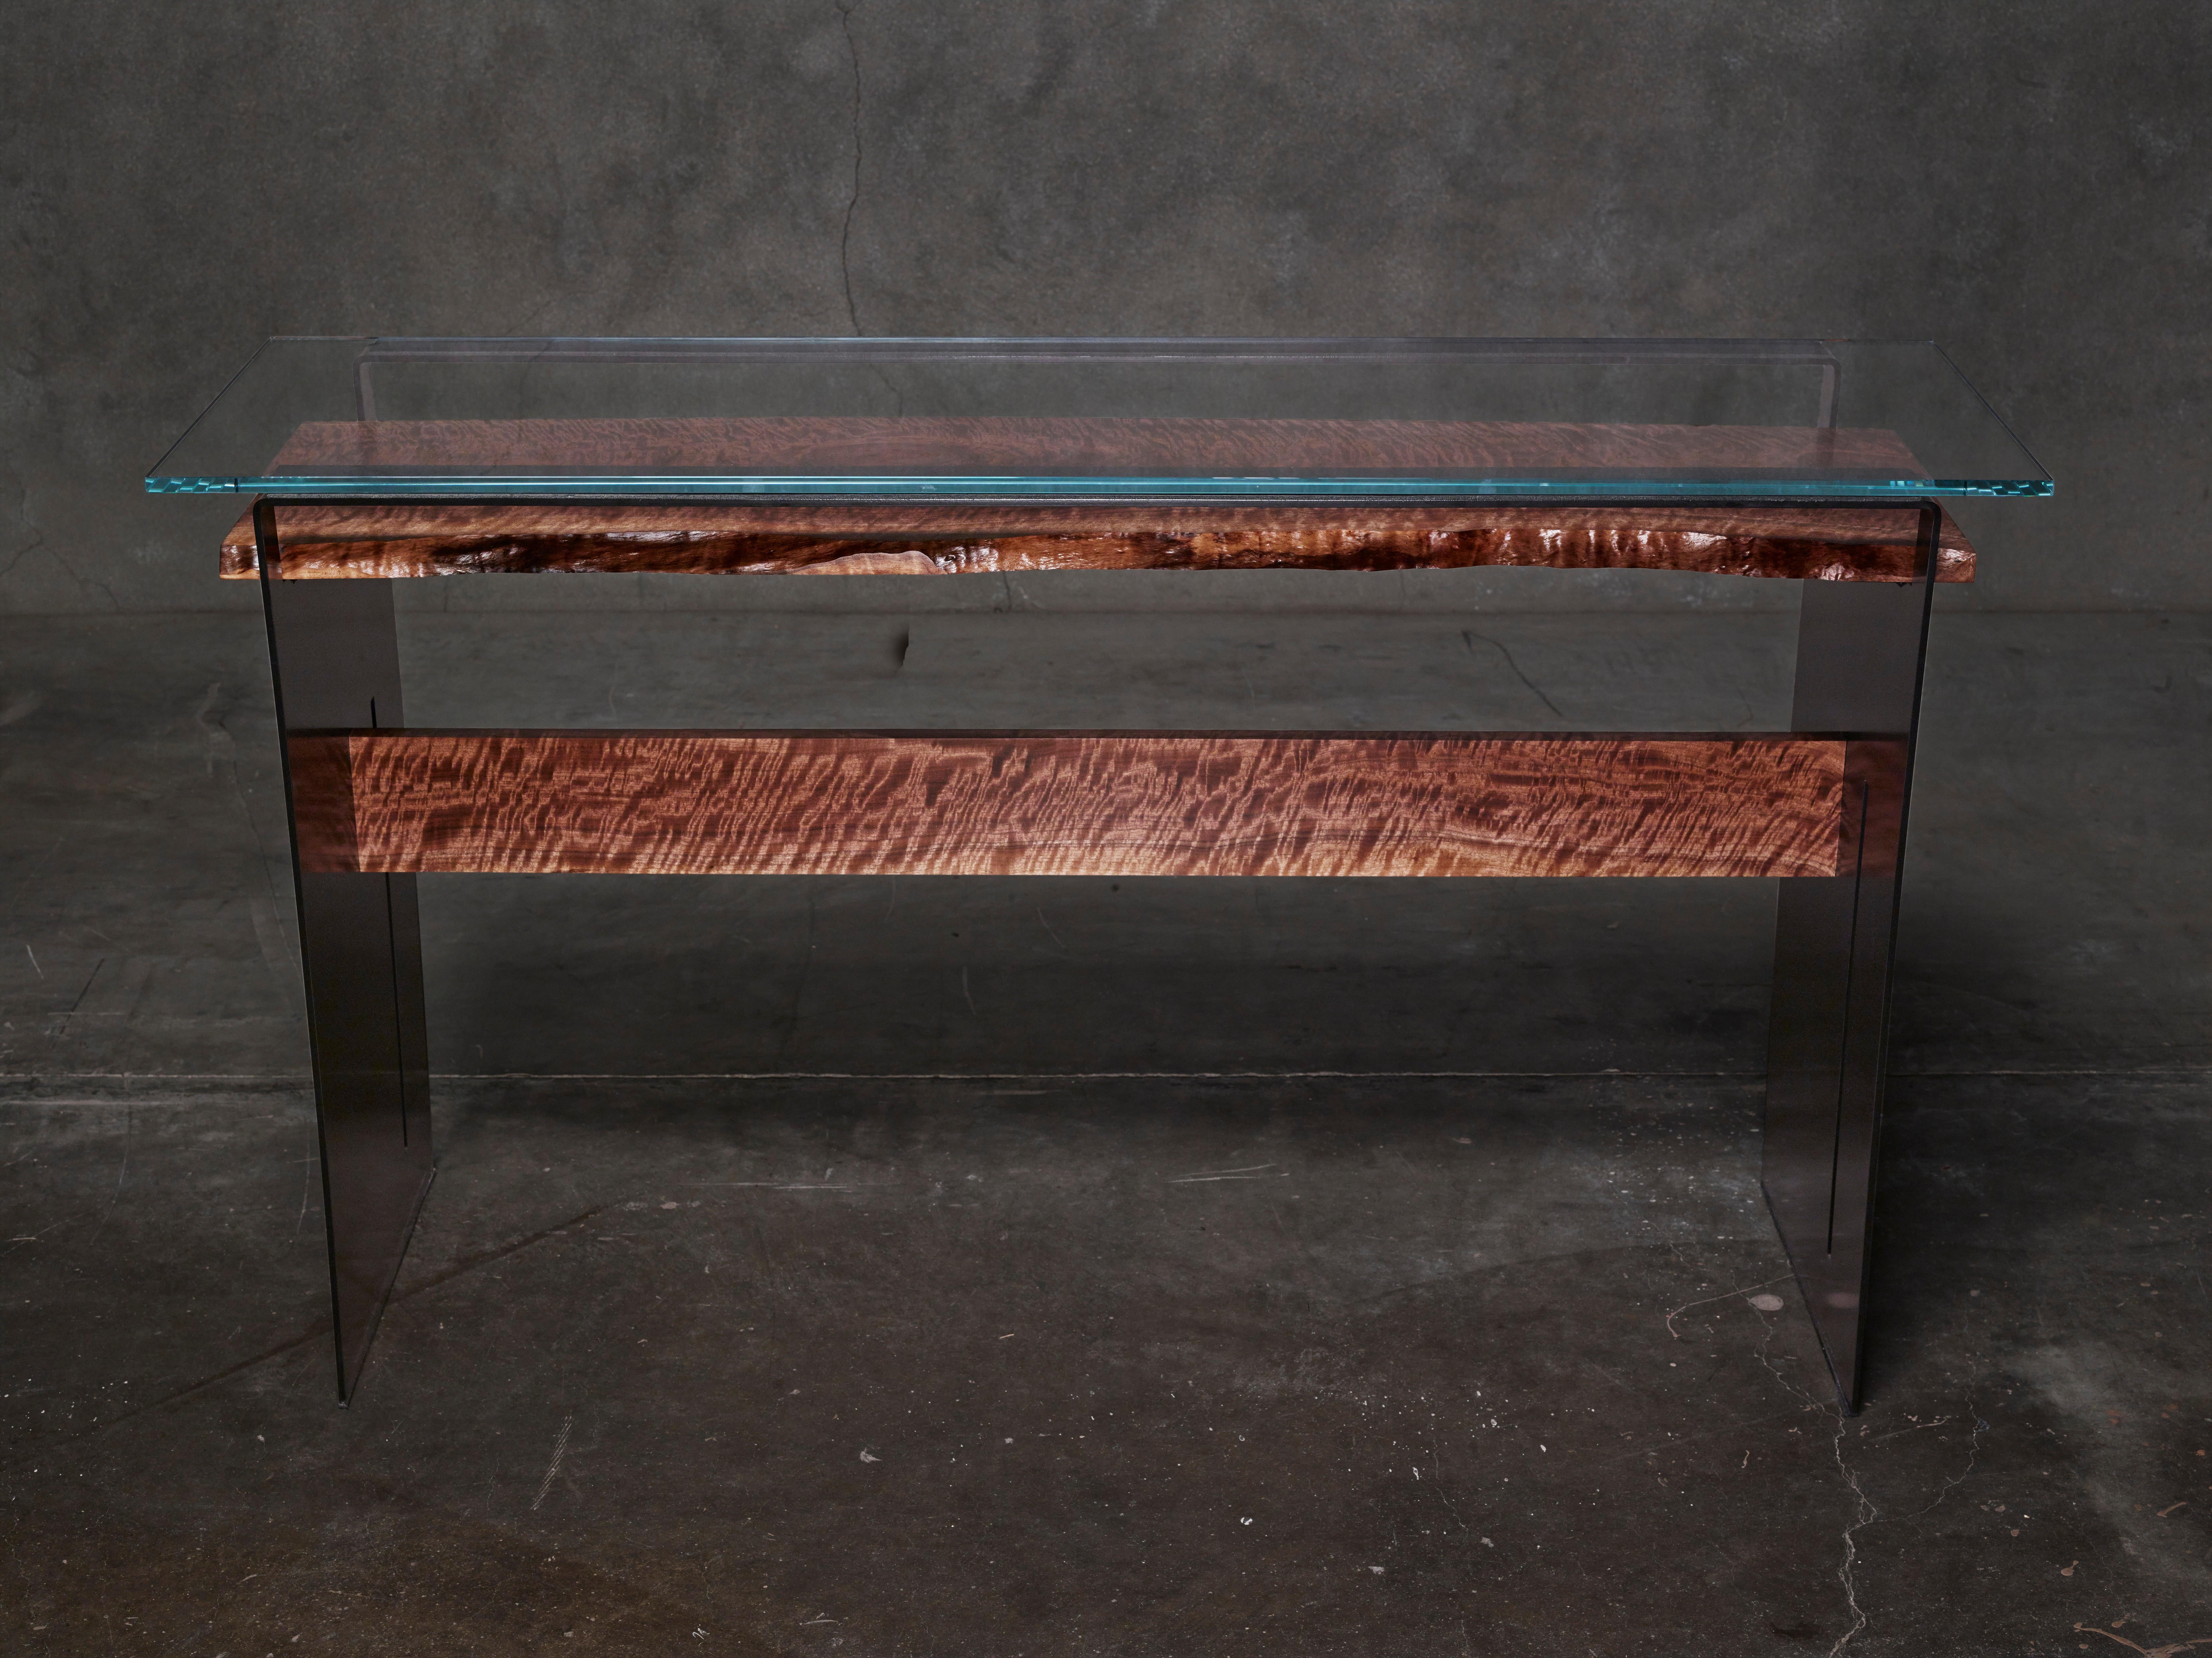 Tiger table is conceived, designed and created by award-winning artist and architectural designer Michael Olshefski of Primal Modern. It is inspired by both complexity and simplicity in nature, and Japanese origami. This modern console table